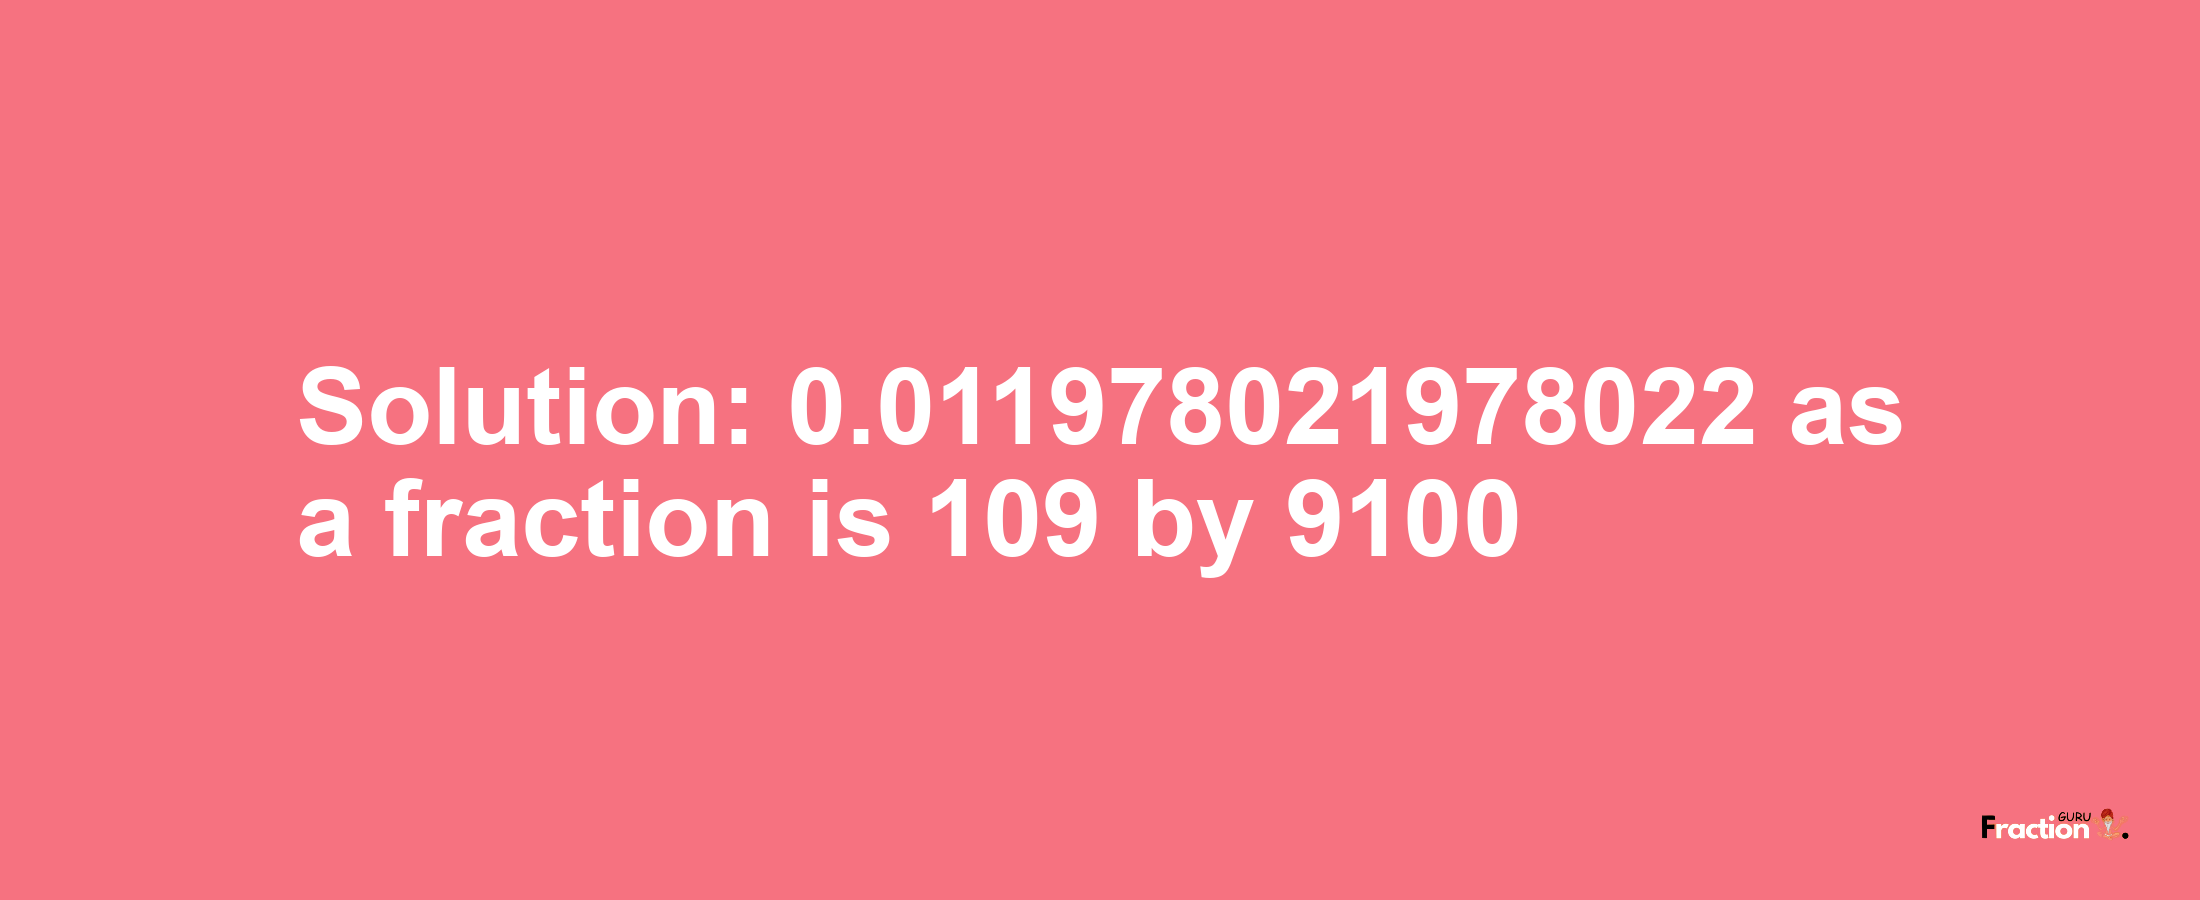 Solution:0.011978021978022 as a fraction is 109/9100